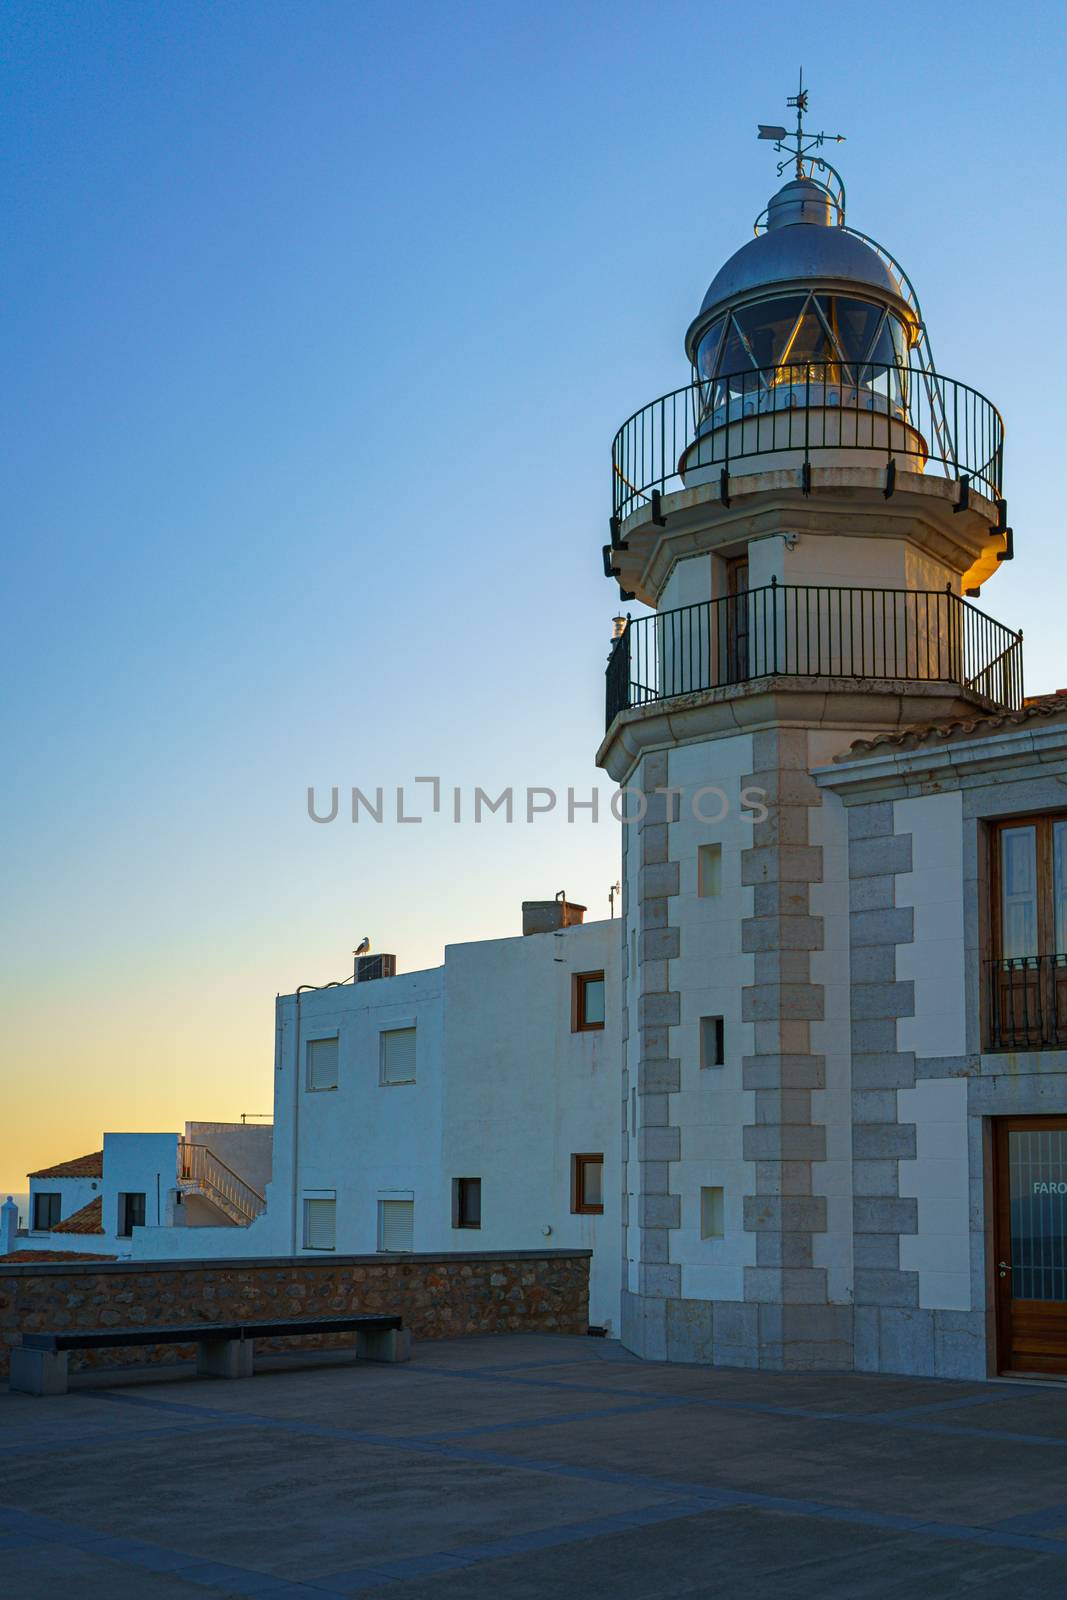 white lighthouse in the medieval town of Peniscola, Spain. by tanaonte